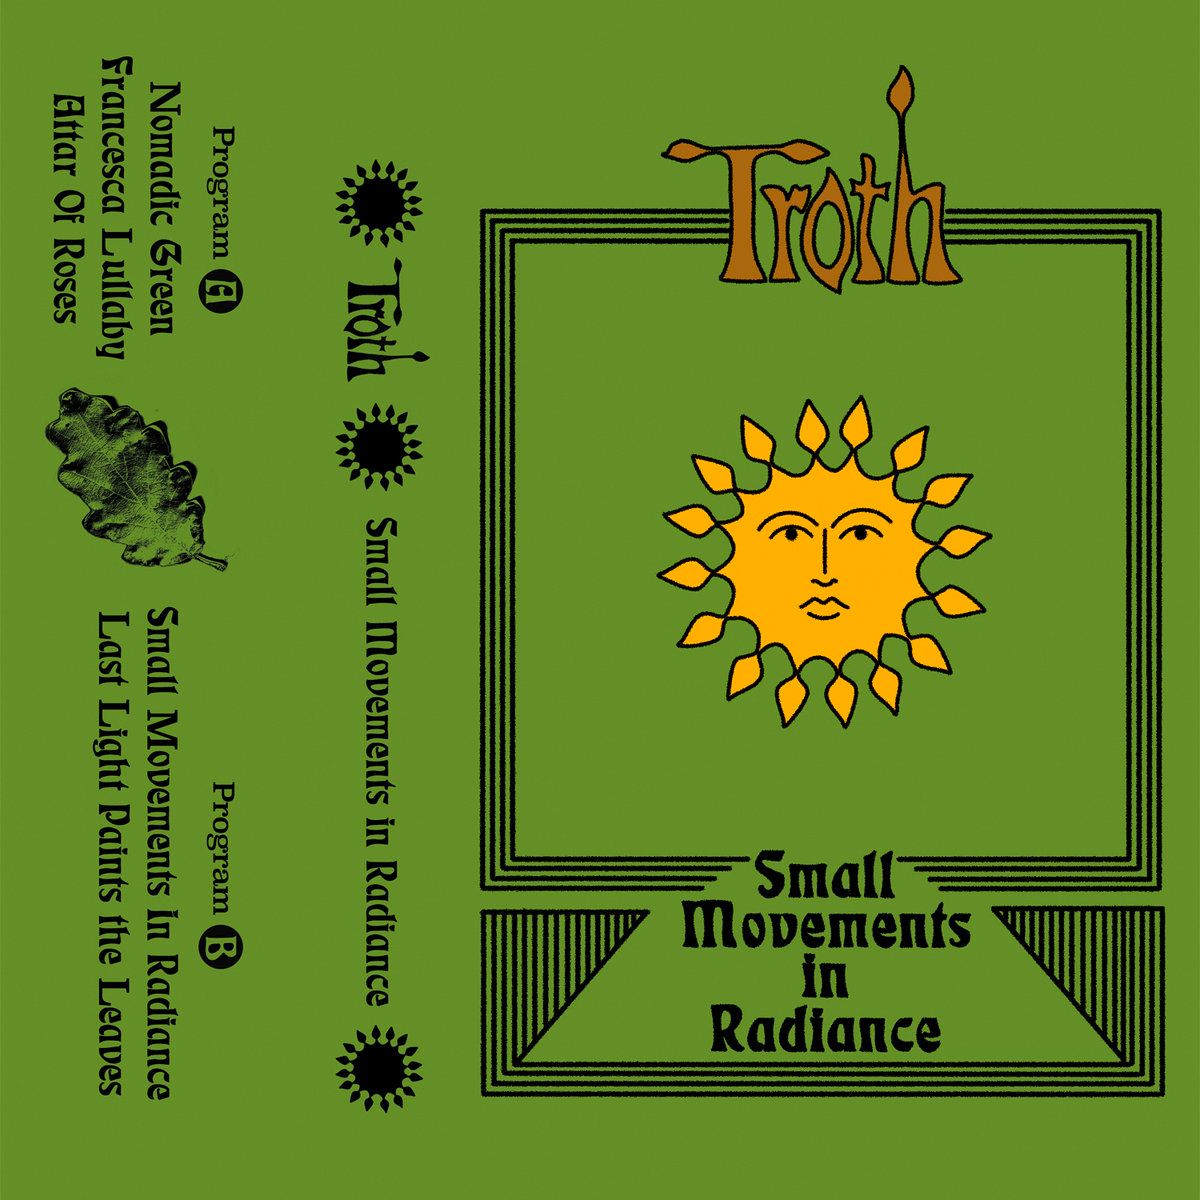 Album cover. Features a simplistic drawing of a sun, styled like a hippie or new age cover, with a strong, solid green color as the background